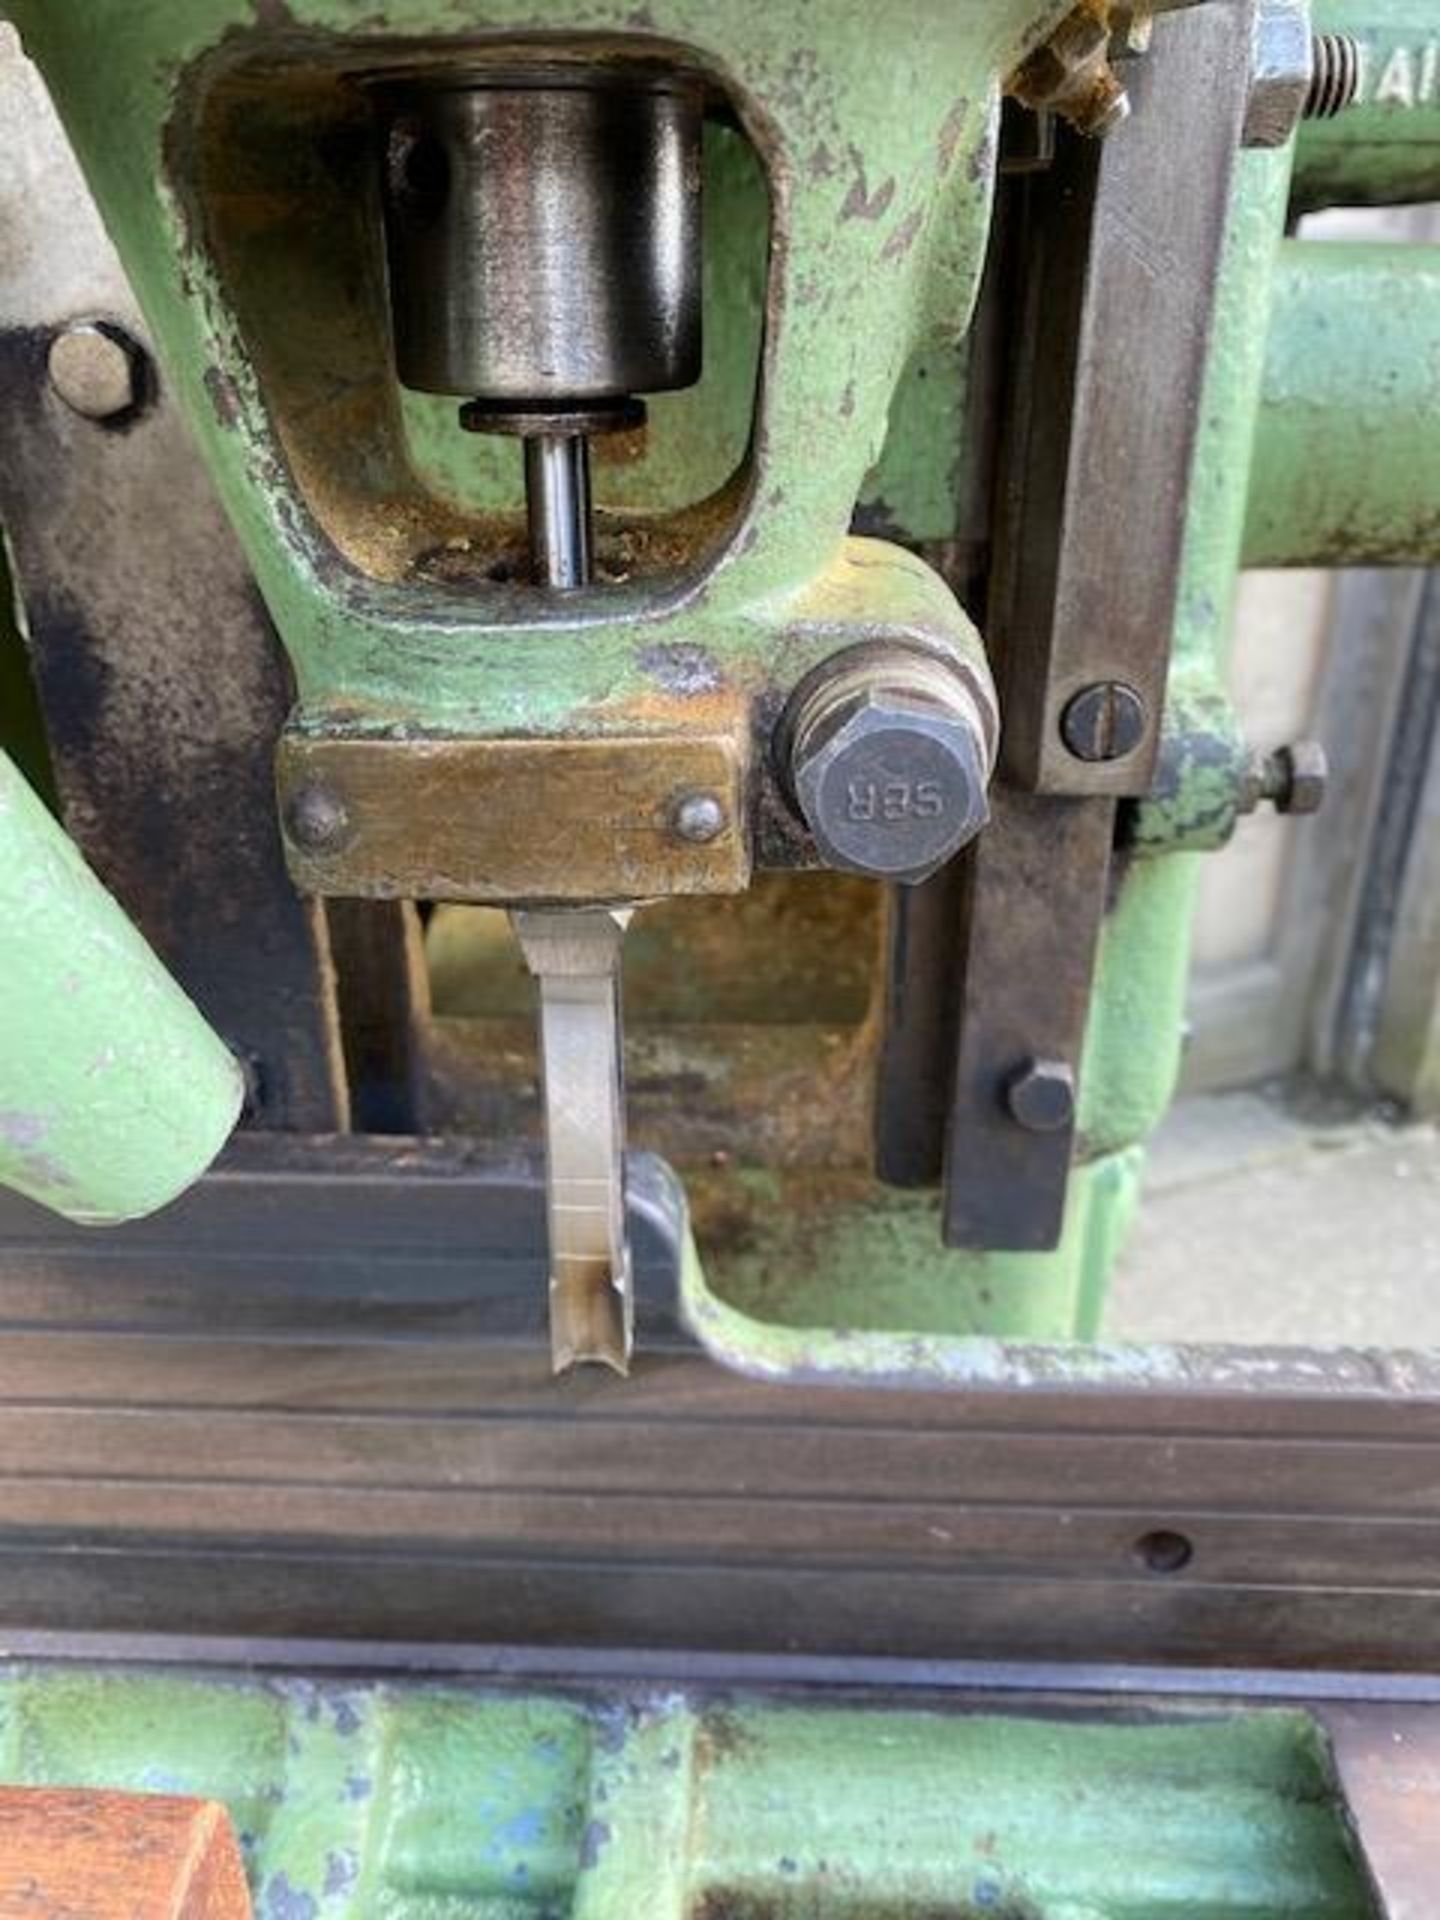 Wadkin MF Chain & Chisel Morticer, serial no. 102358, with grinding attachmentPlease read the - Bild 4 aus 9